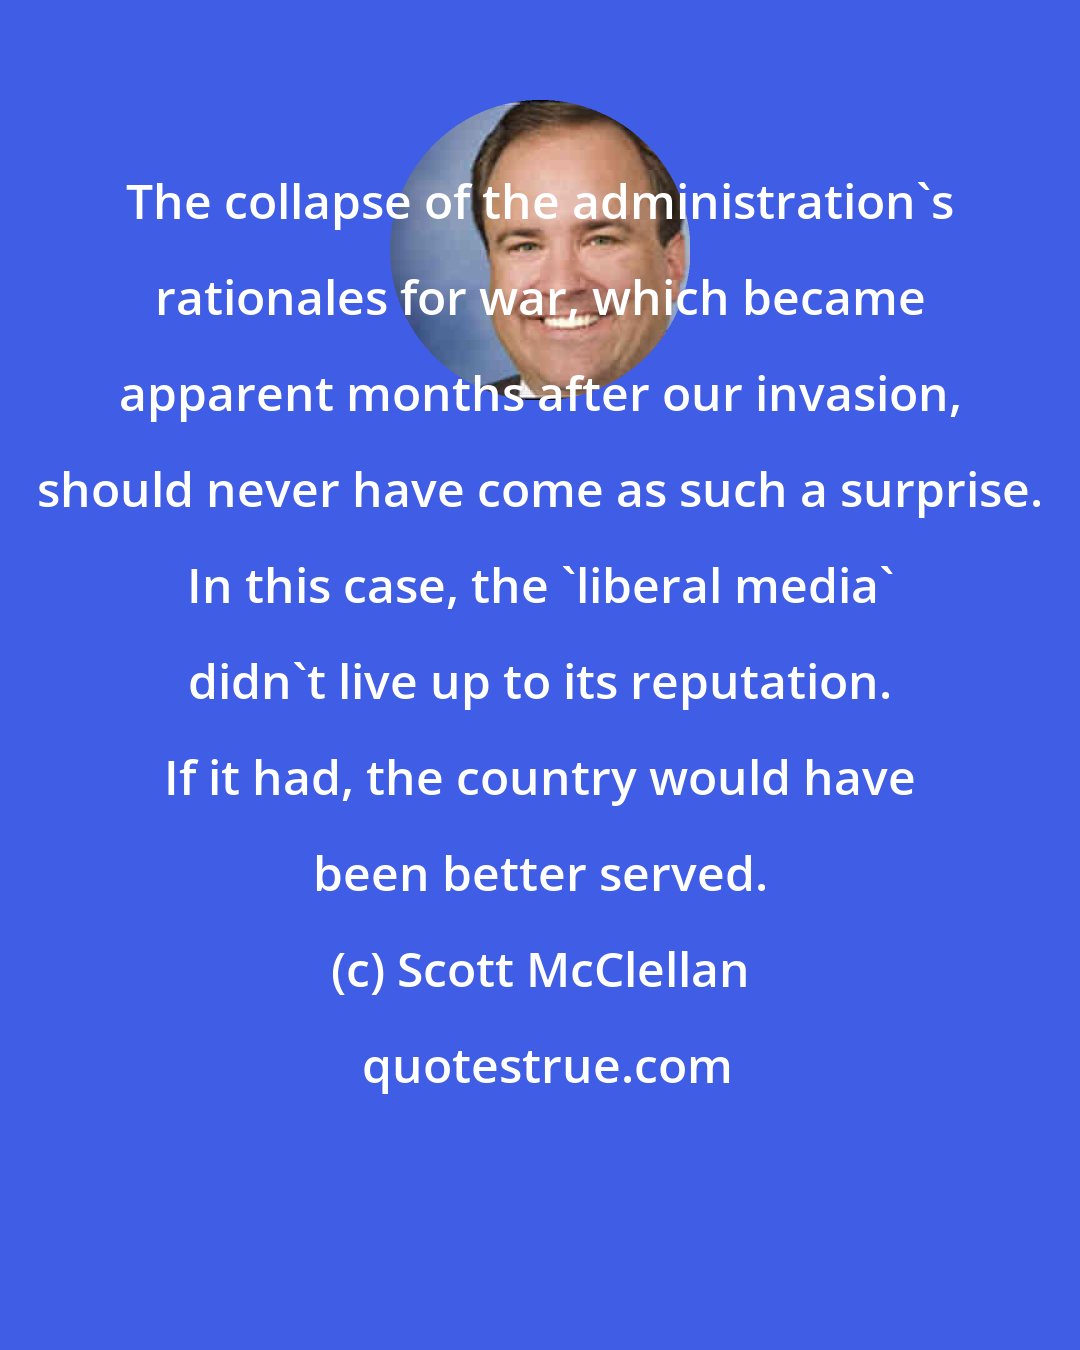 Scott McClellan: The collapse of the administration's rationales for war, which became apparent months after our invasion, should never have come as such a surprise. In this case, the 'liberal media' didn't live up to its reputation. If it had, the country would have been better served.